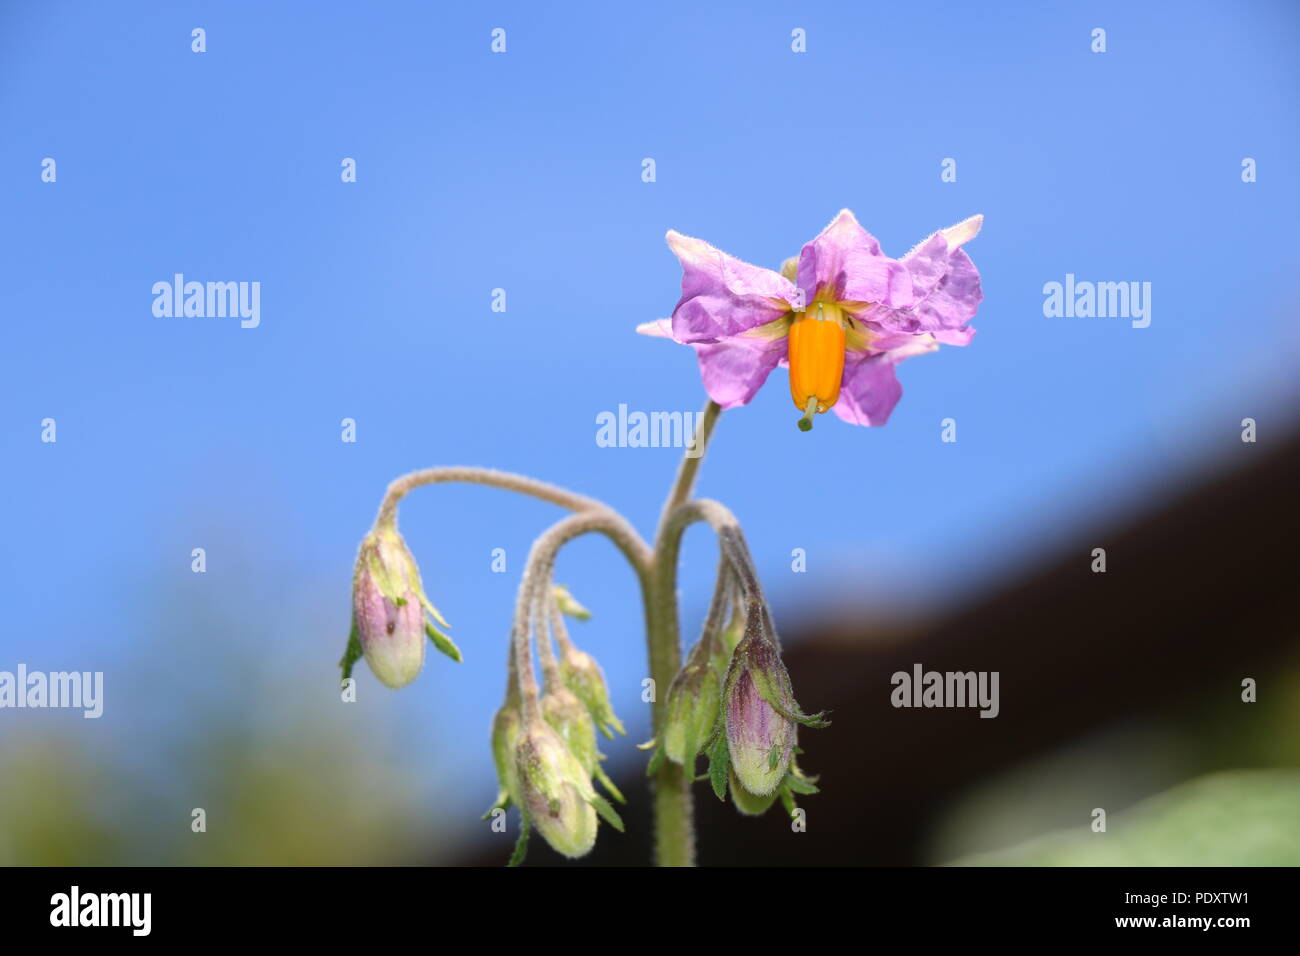 Potato Flowers, Flowers of the Potato Plant with pink petals and yellow stamen. Stock Photo